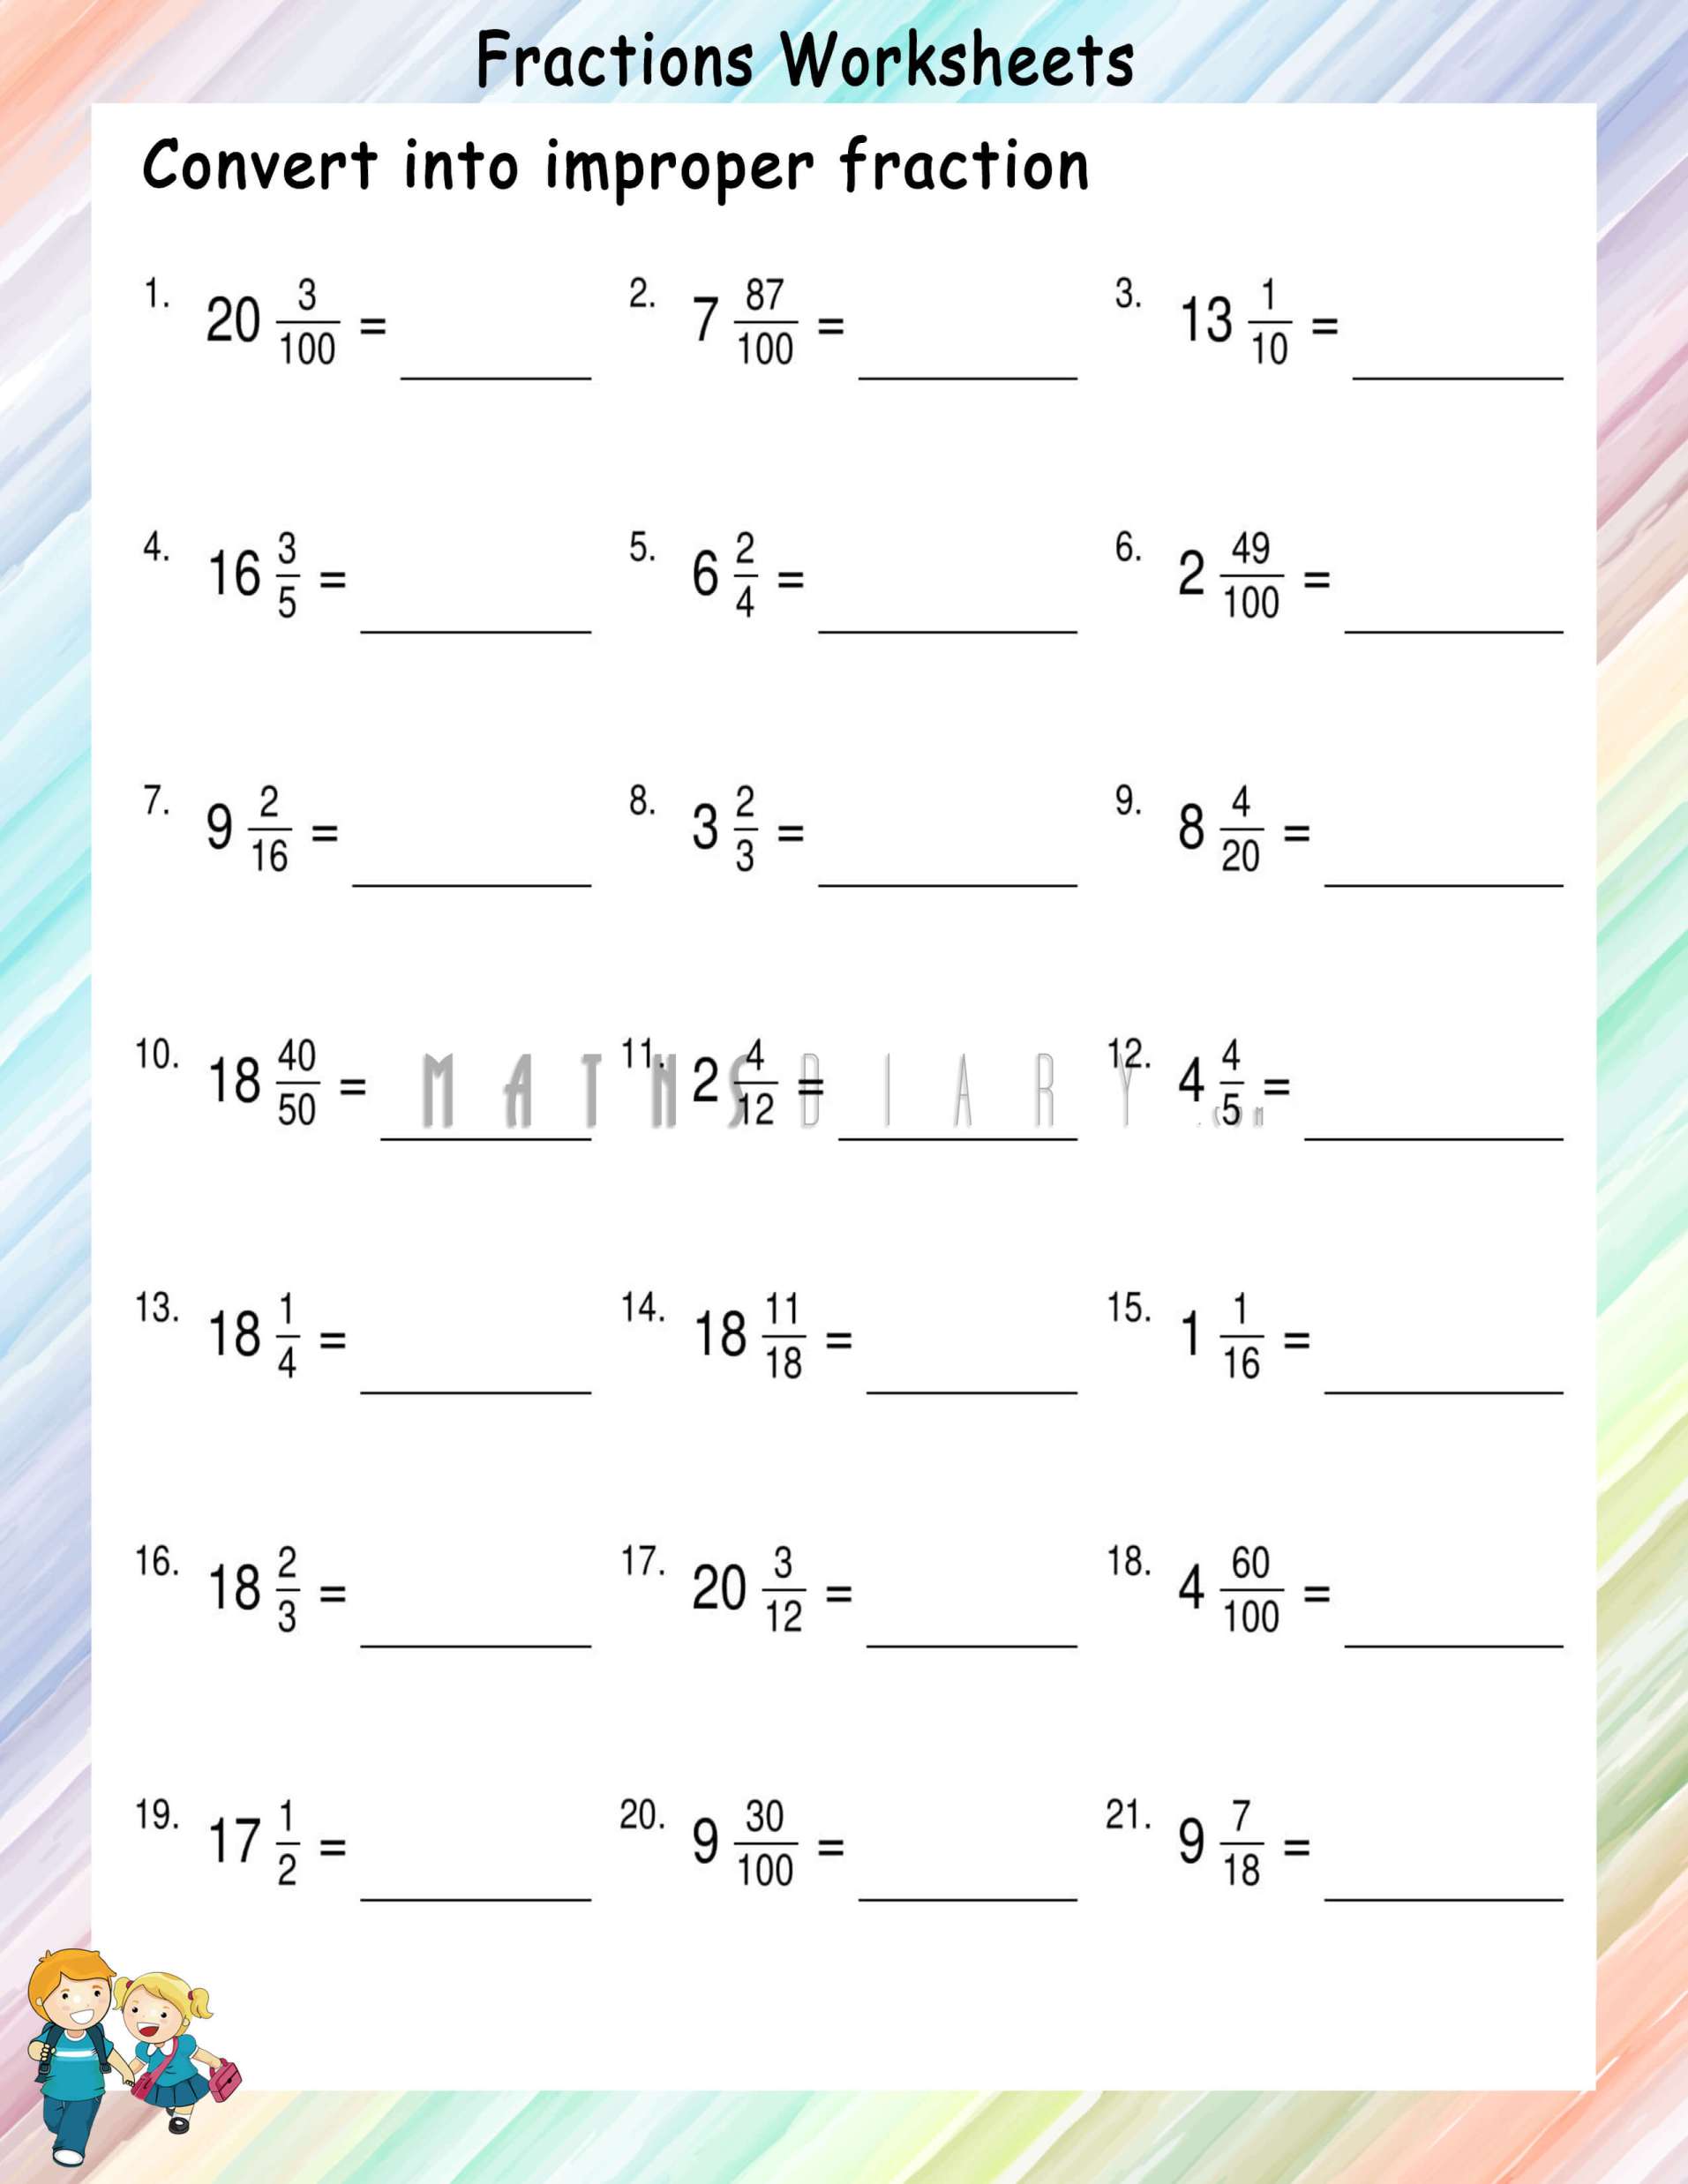 fractions-worksheet-convert-improper-fractions-to-mixed-numbers-k5-learning-grade-4-math